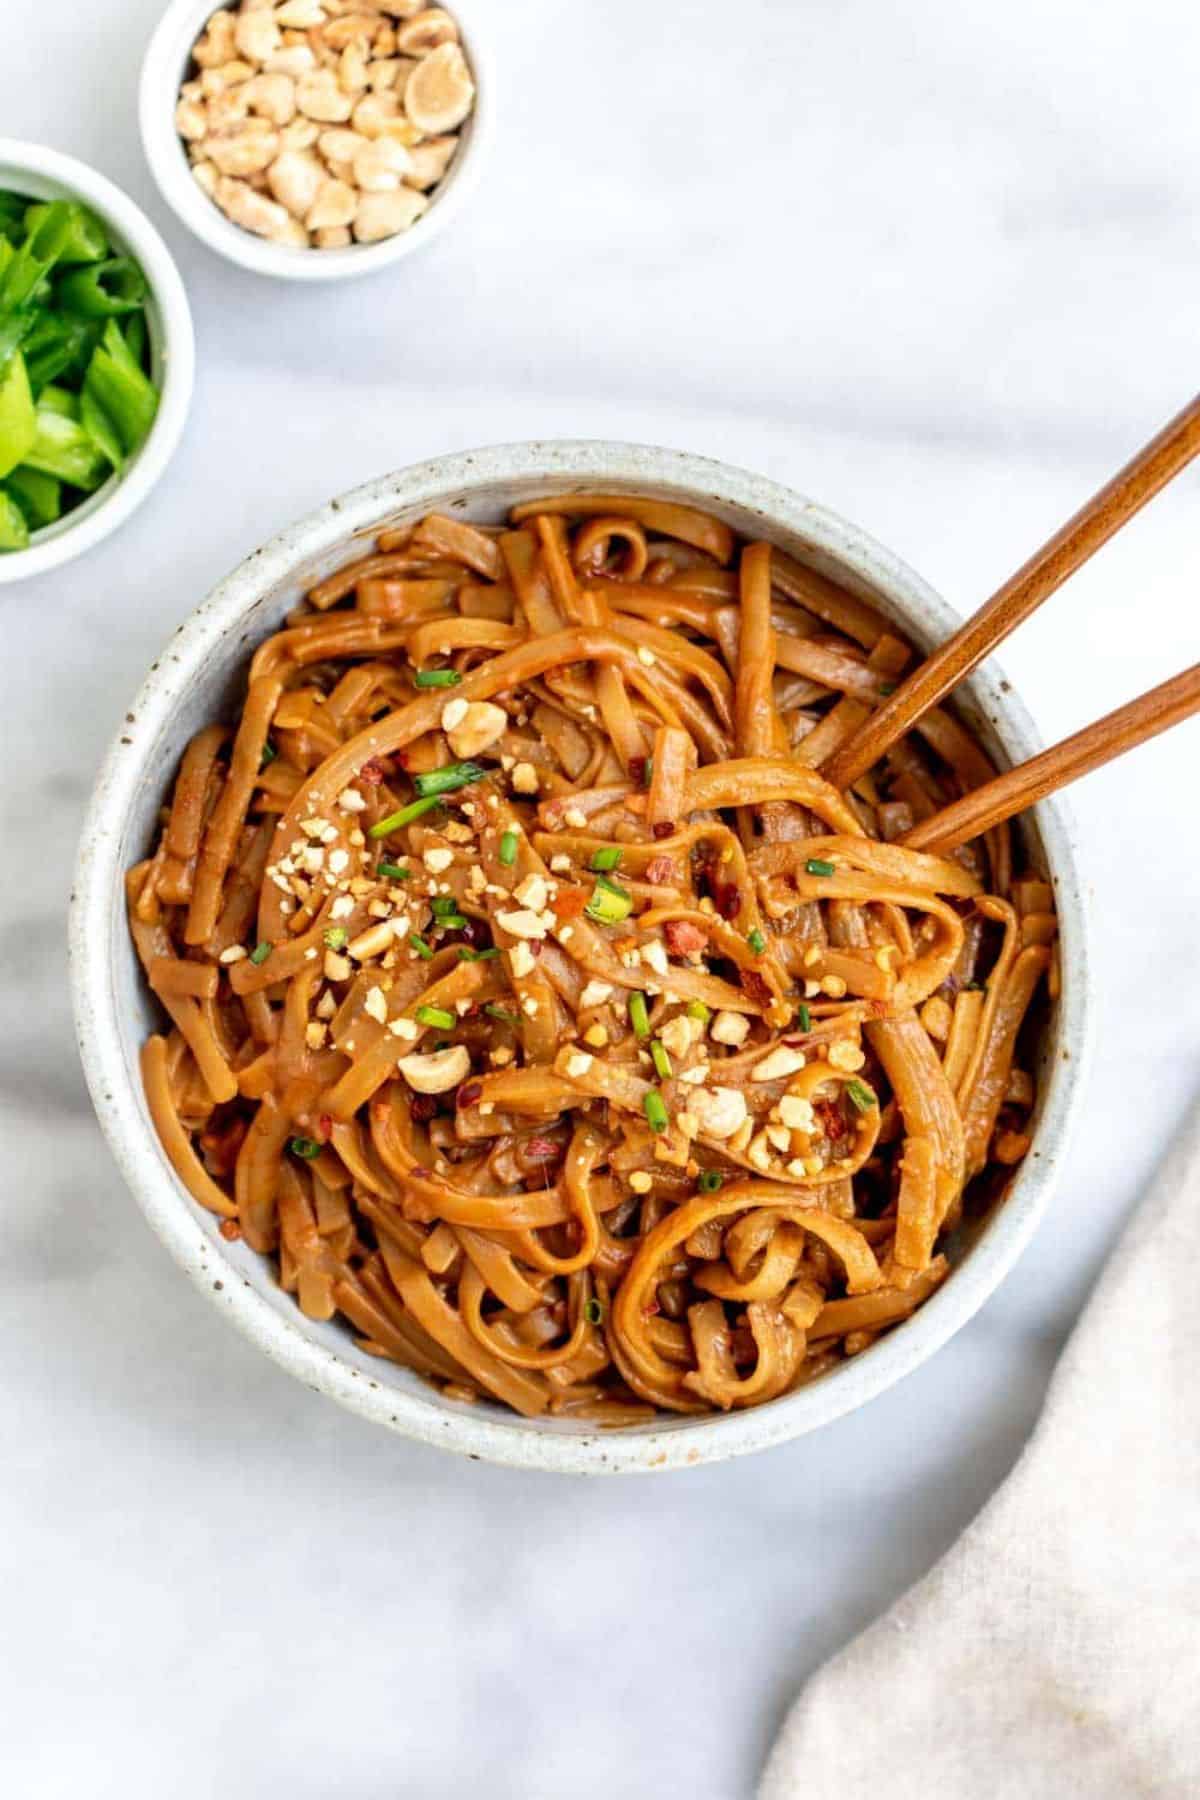 15 Minute Spicy Peanut Butter Noodles in a white bowl with chopsticks.